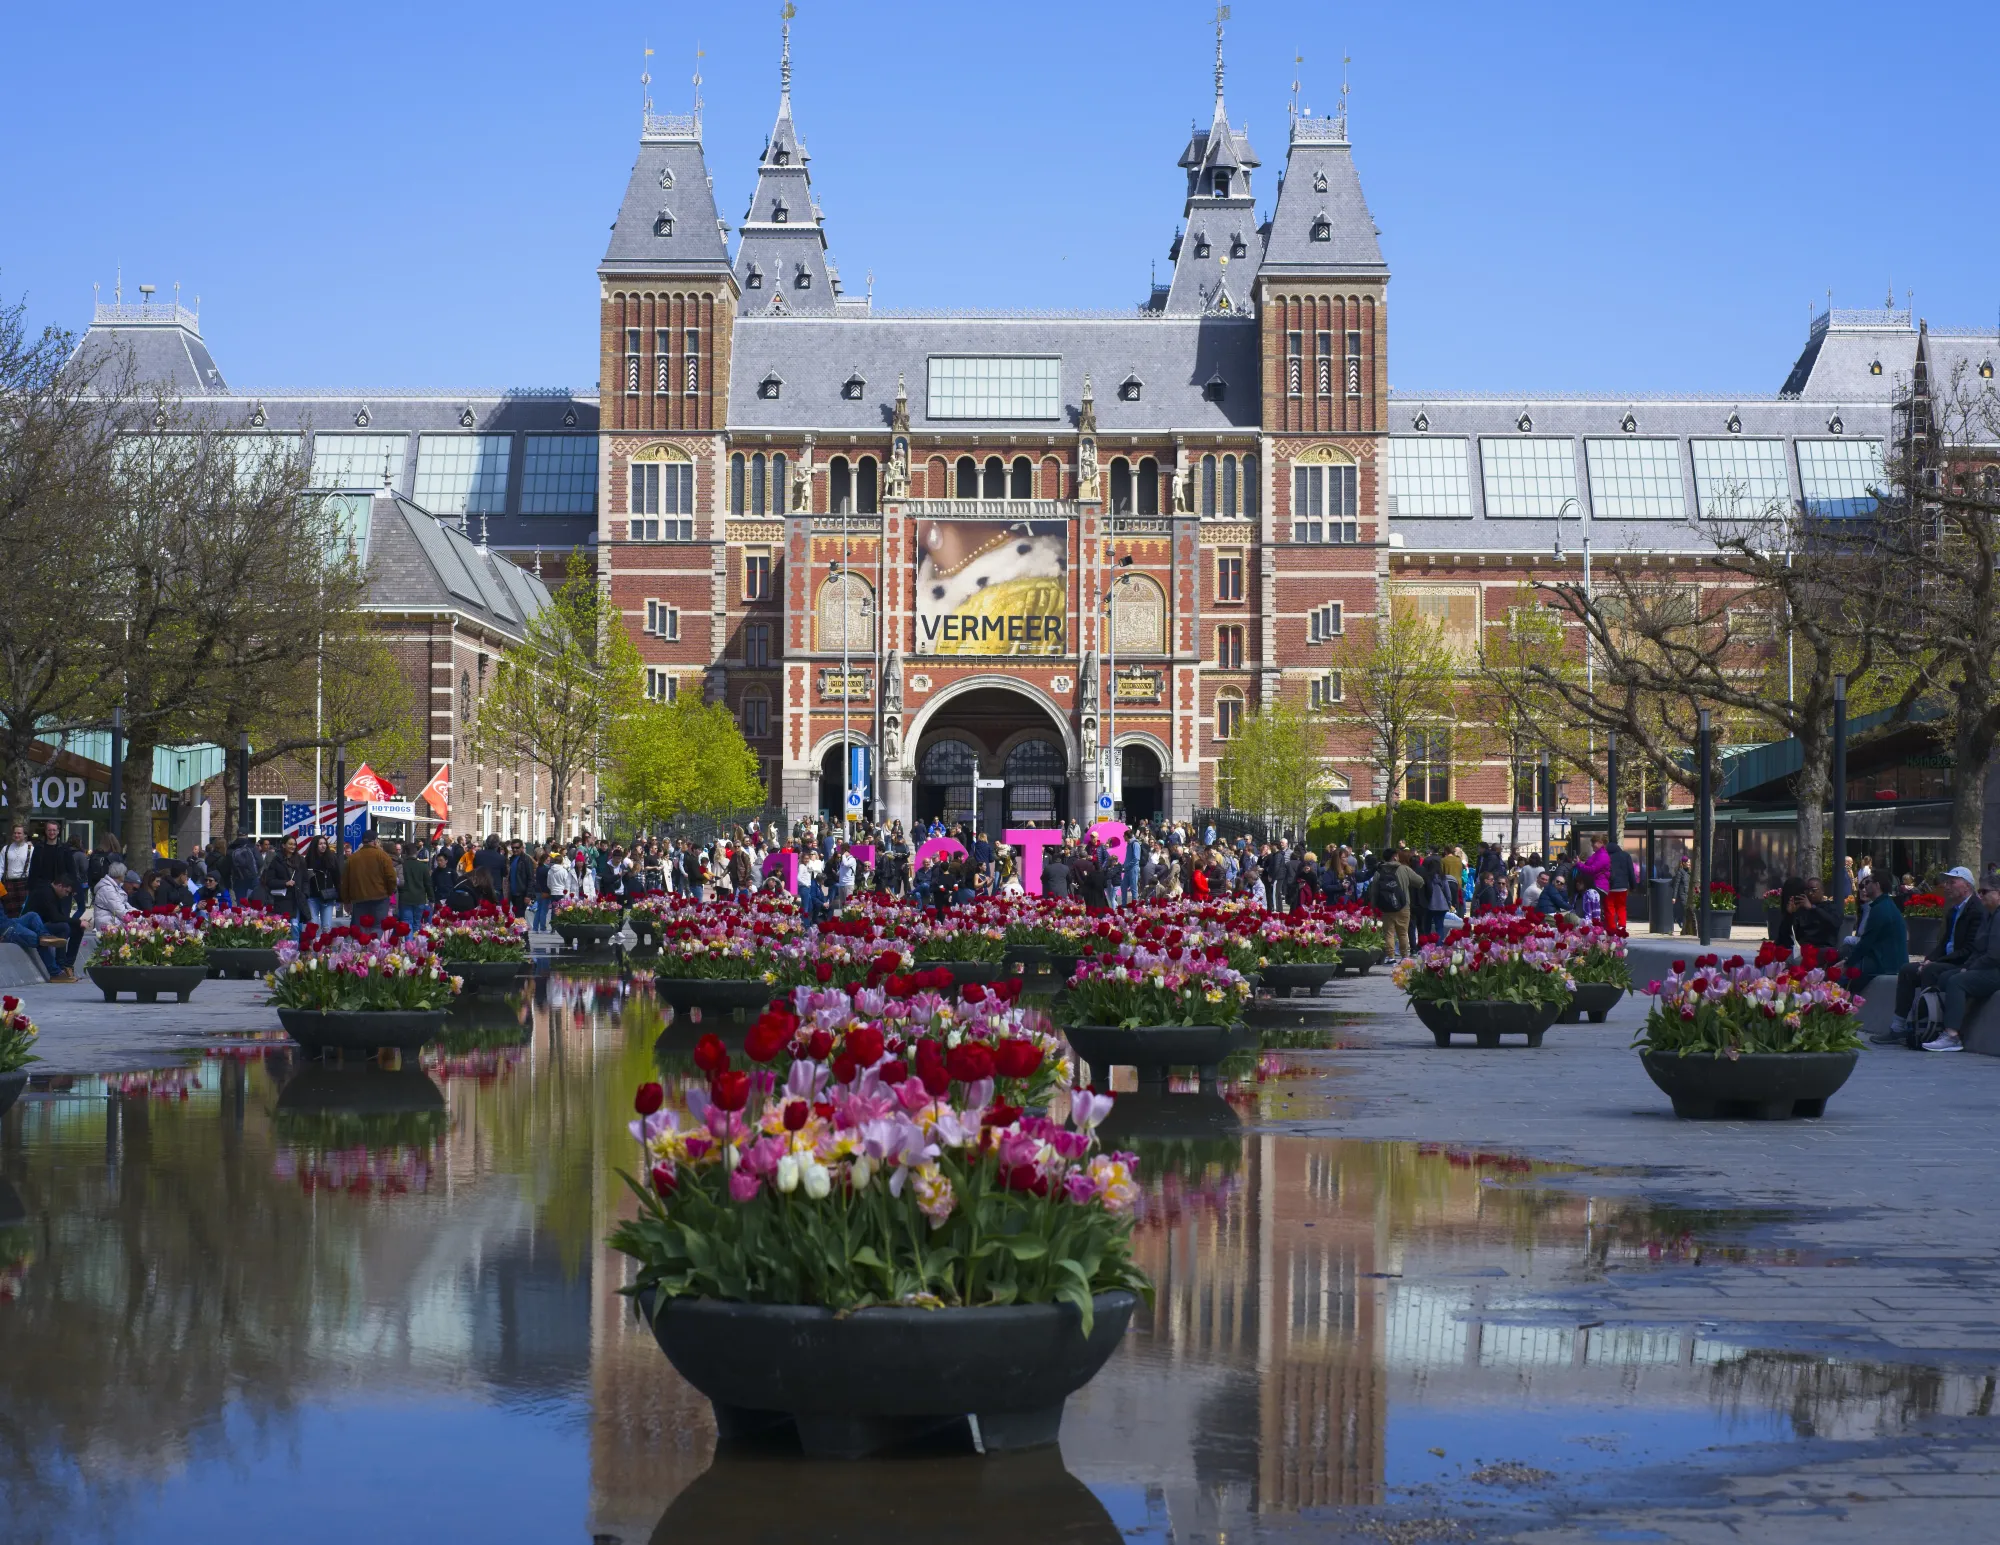 Museum reflected in a pool of water with basins of tulips